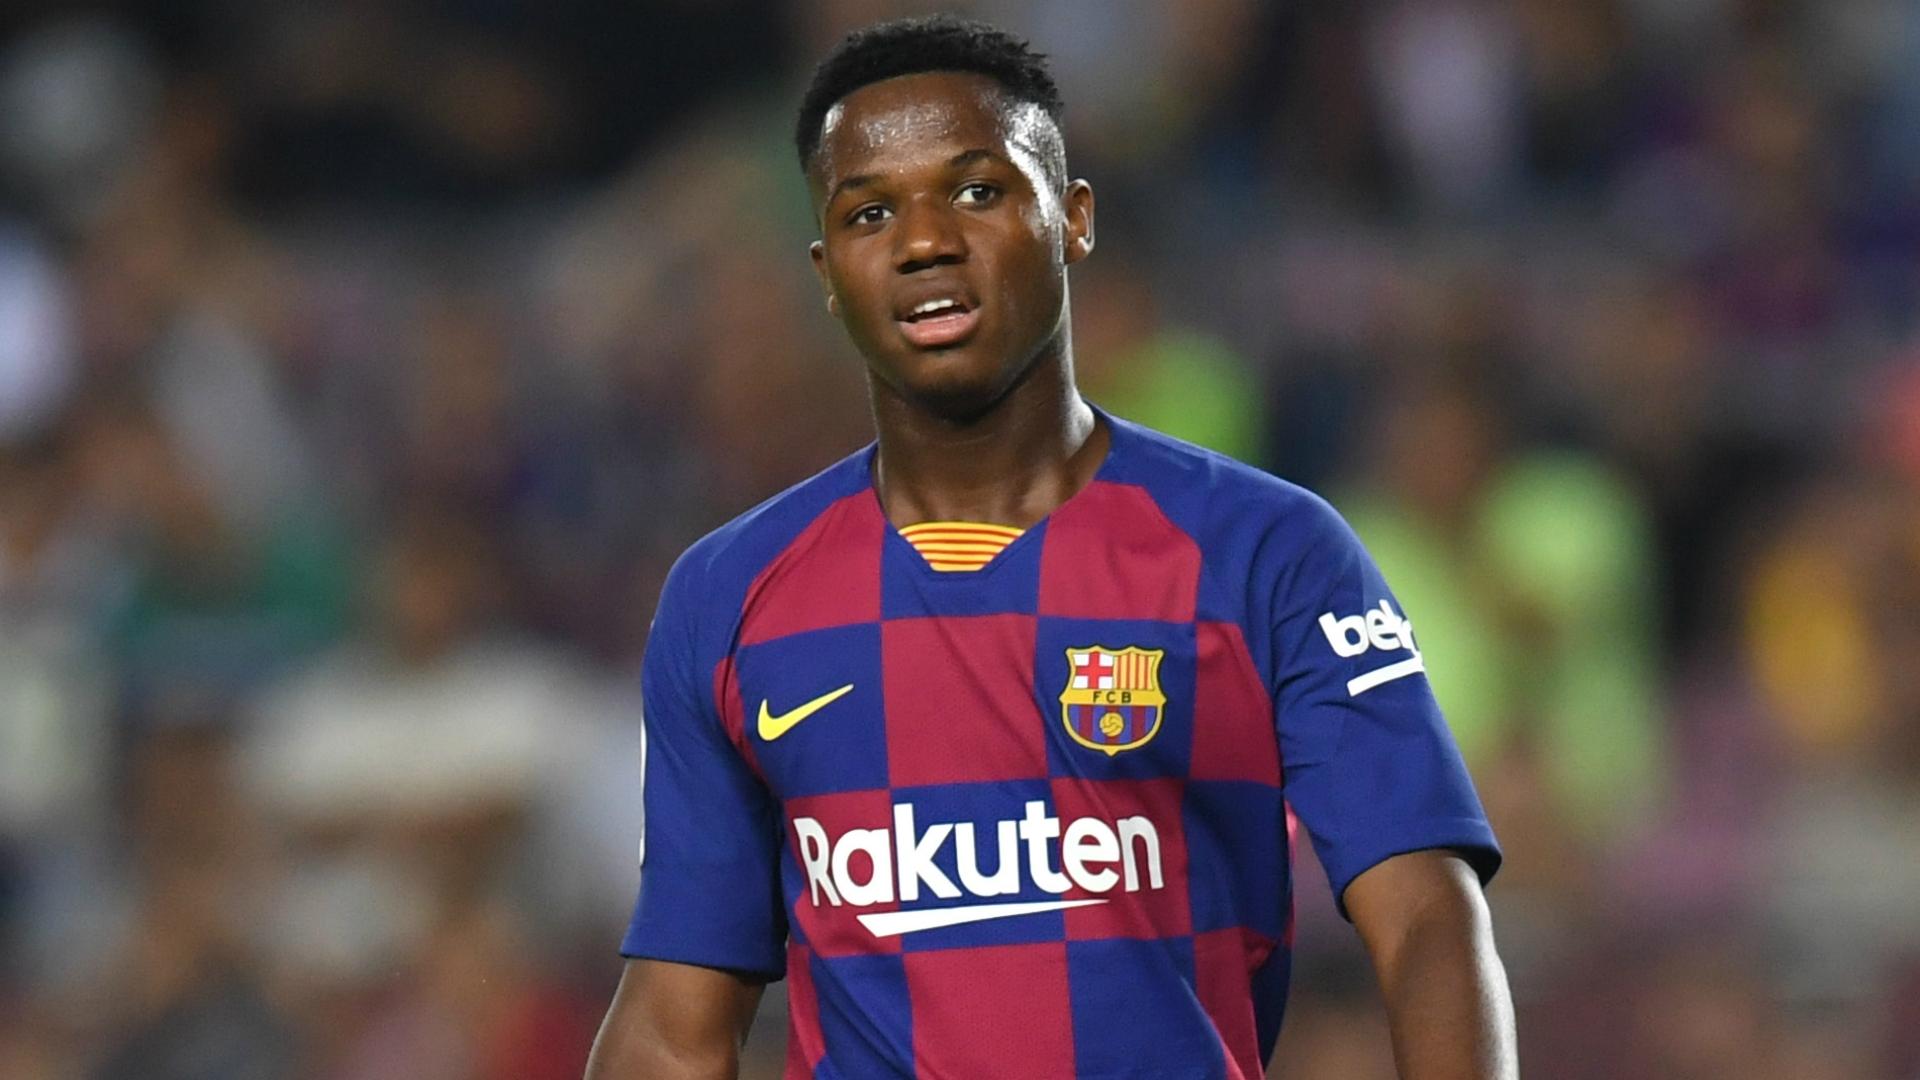 Reports: Barcelona starlet Ansu Fati's contract details